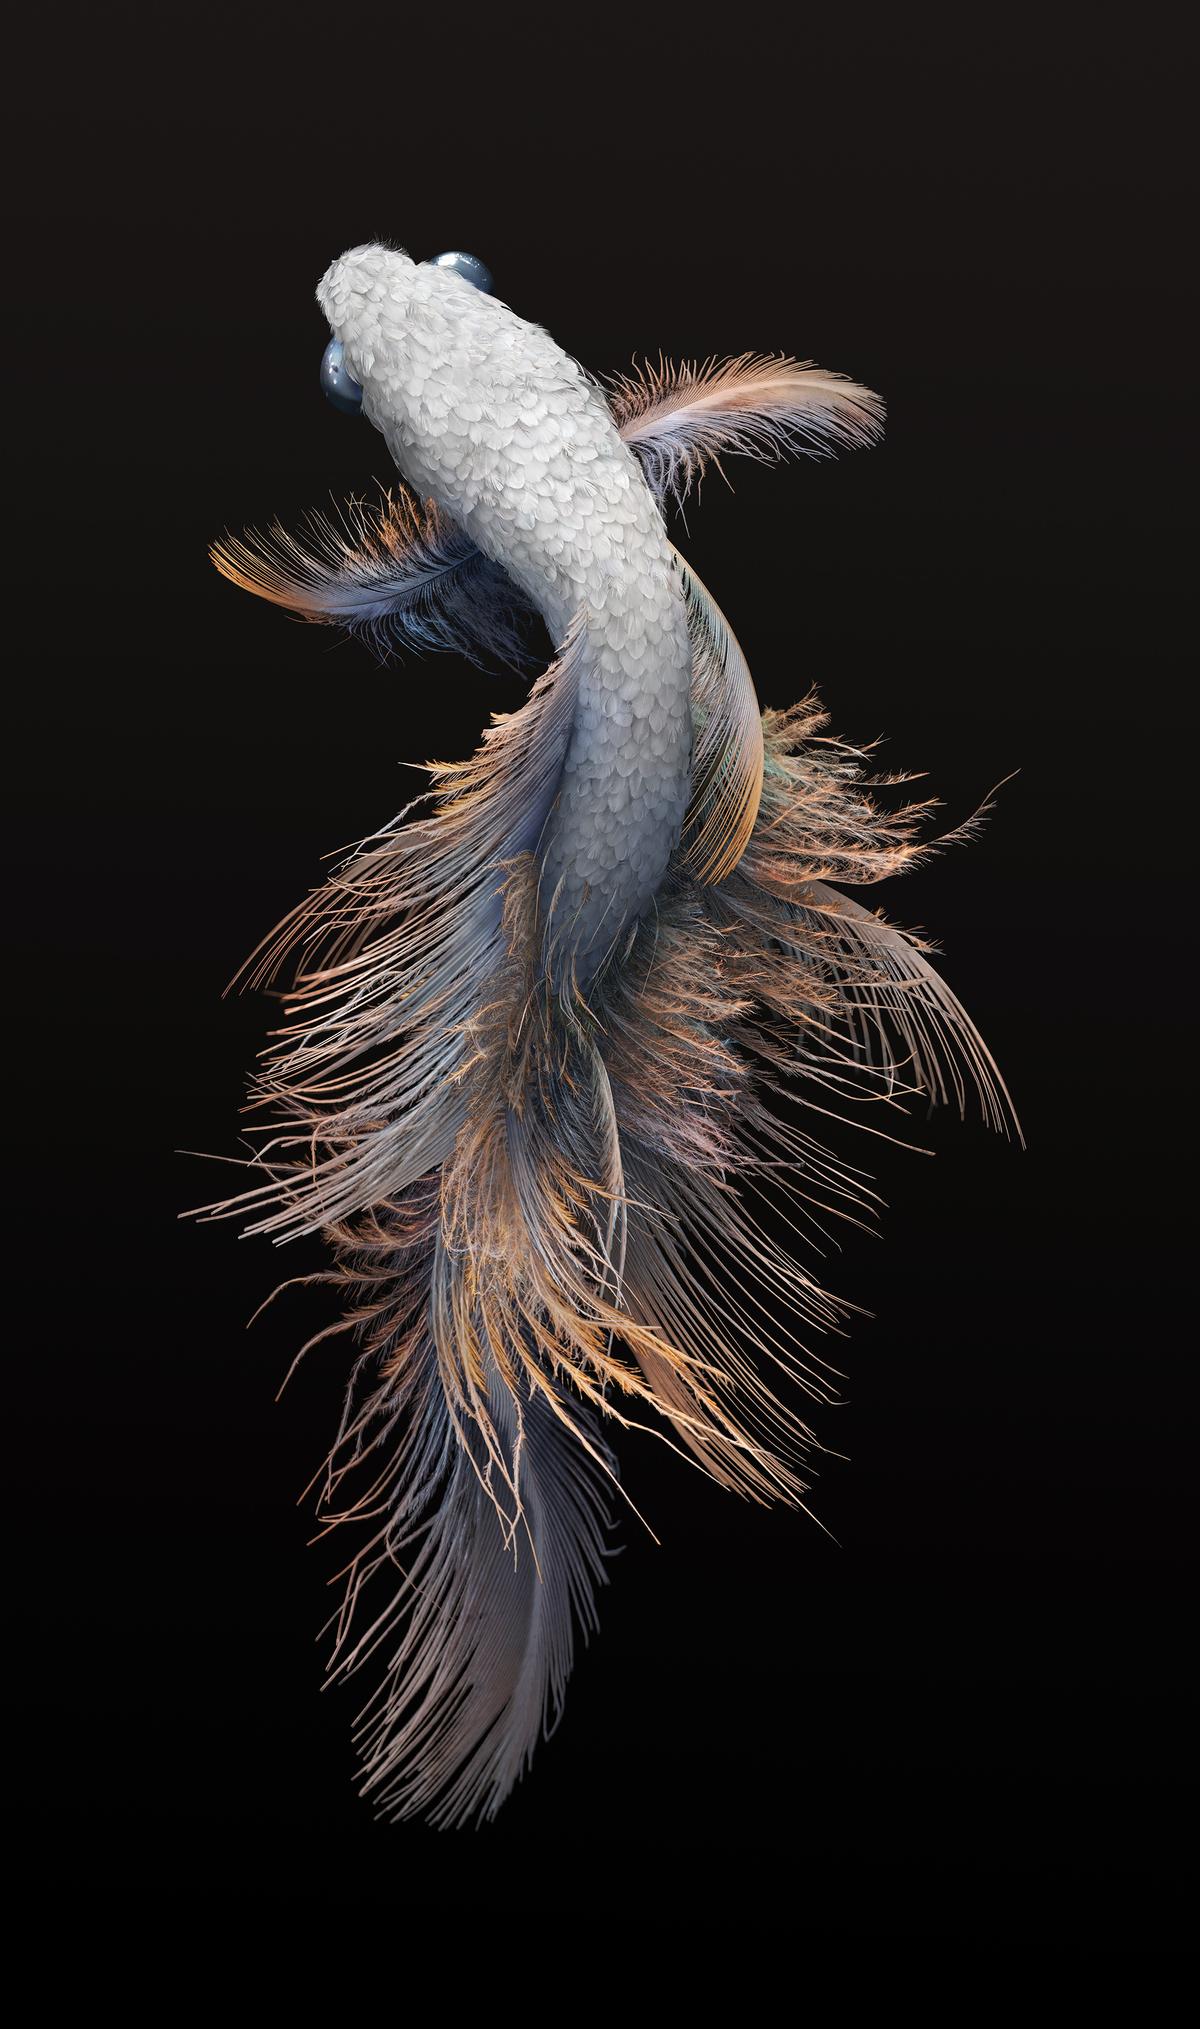 The scales of a fish are depicted using feathers, including some from a white peacock from the Yarra Valley Nocturnal Zoo. (Courtesy of <a href="https://www.instagram.com/joshdykgraaf/">Josh Dykgraaf</a>)